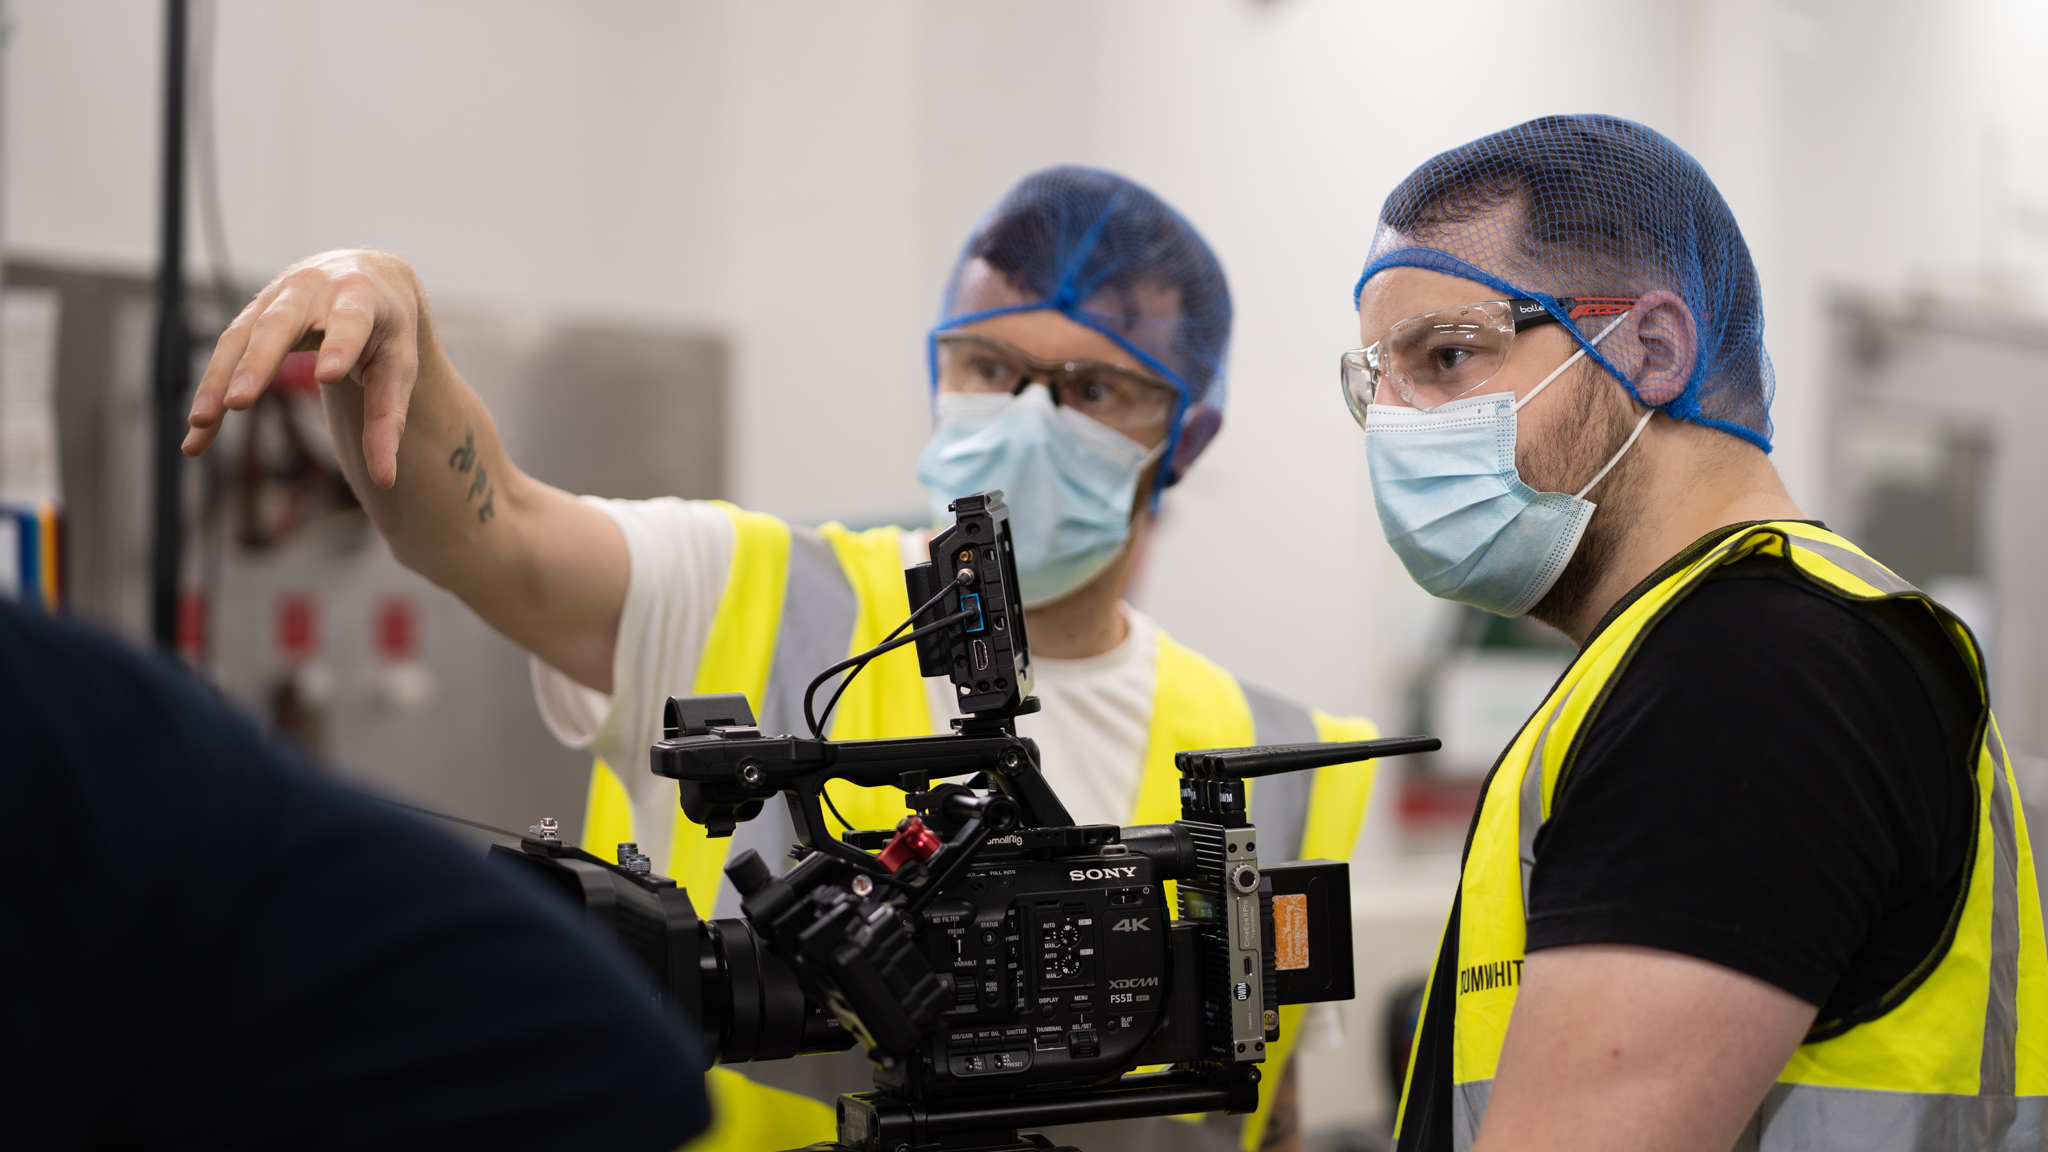 A behind the scenes photo of the Incite team filming a safety video